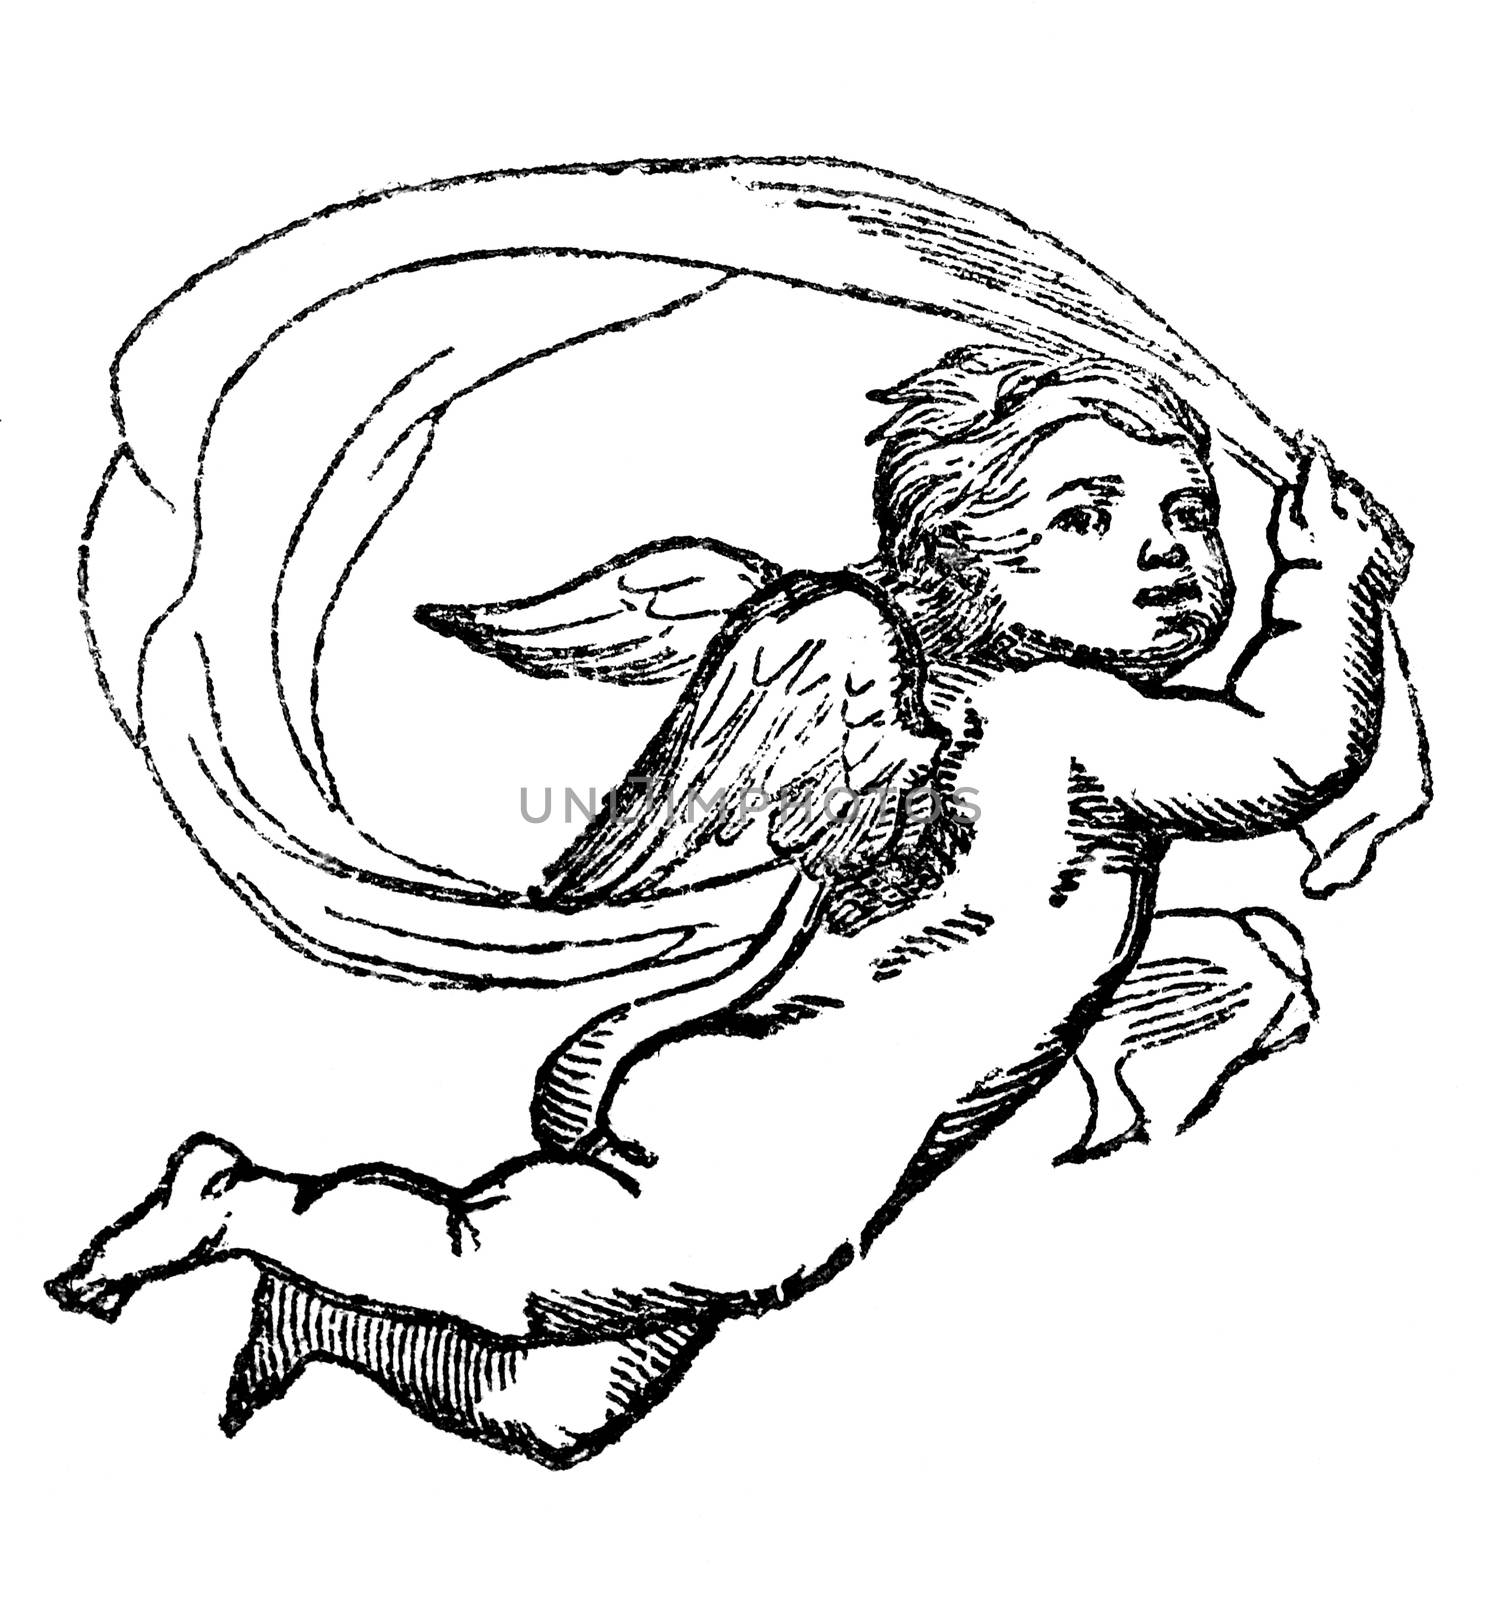 An engraved vintage love romance illustration image of  a cherub angel, from a Victorian book dated 1856 that is no longer in copyright